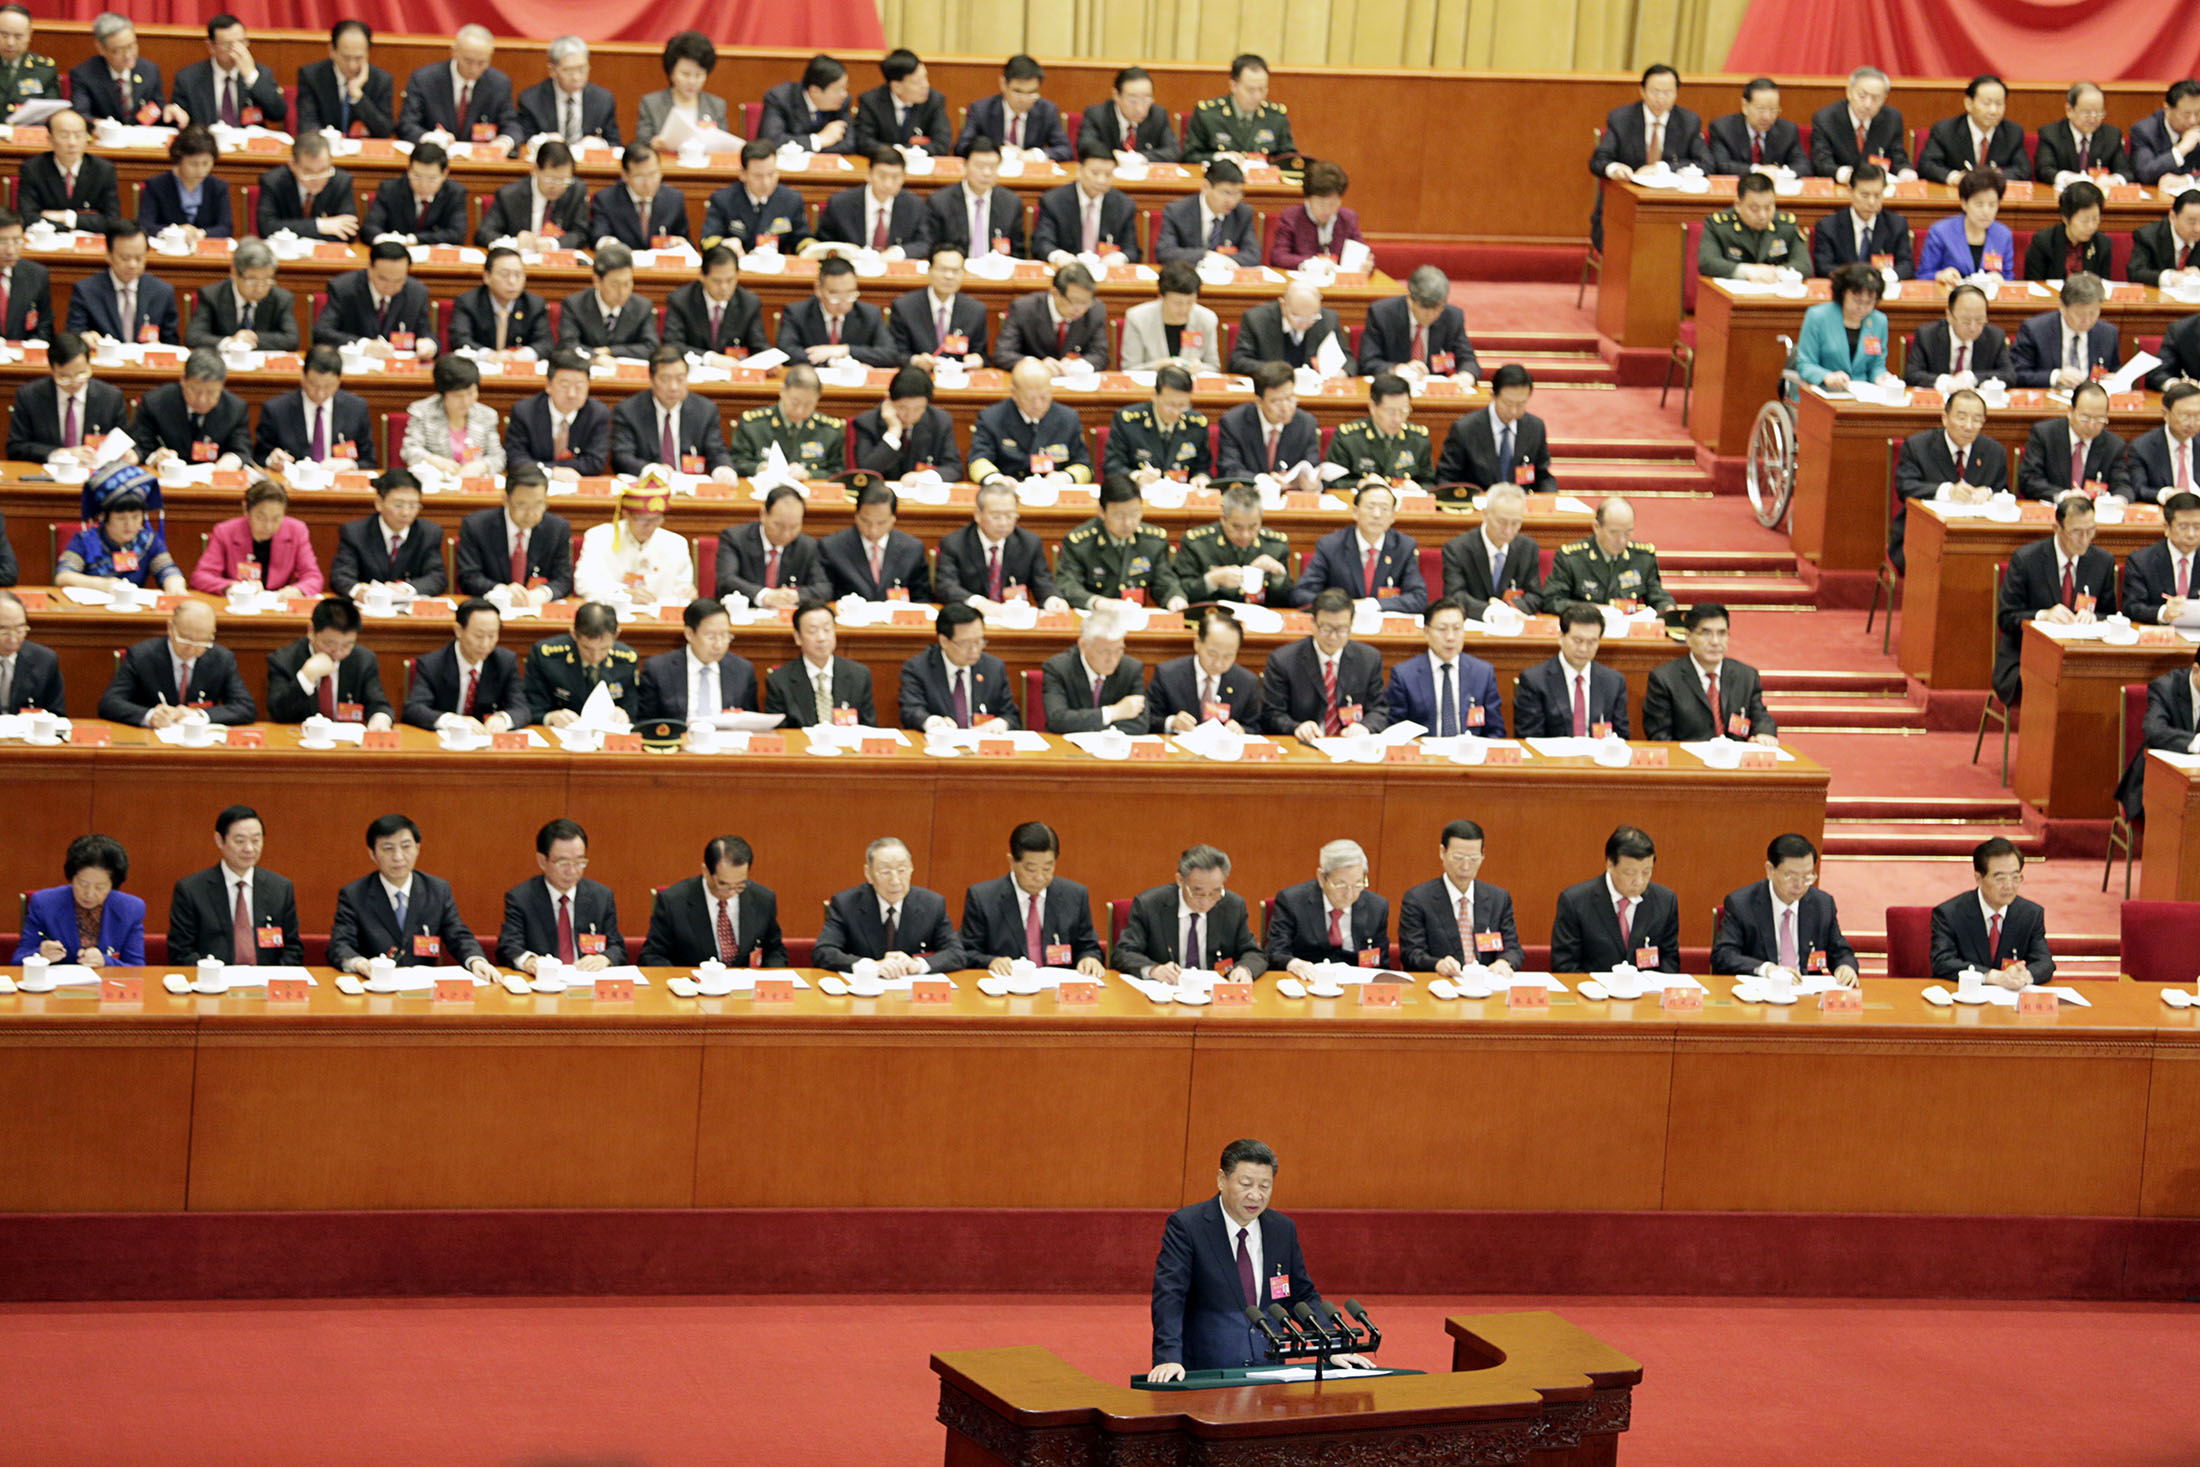 Xi Jinping speaks during the 19th National Congress of the Communist Party of China.
